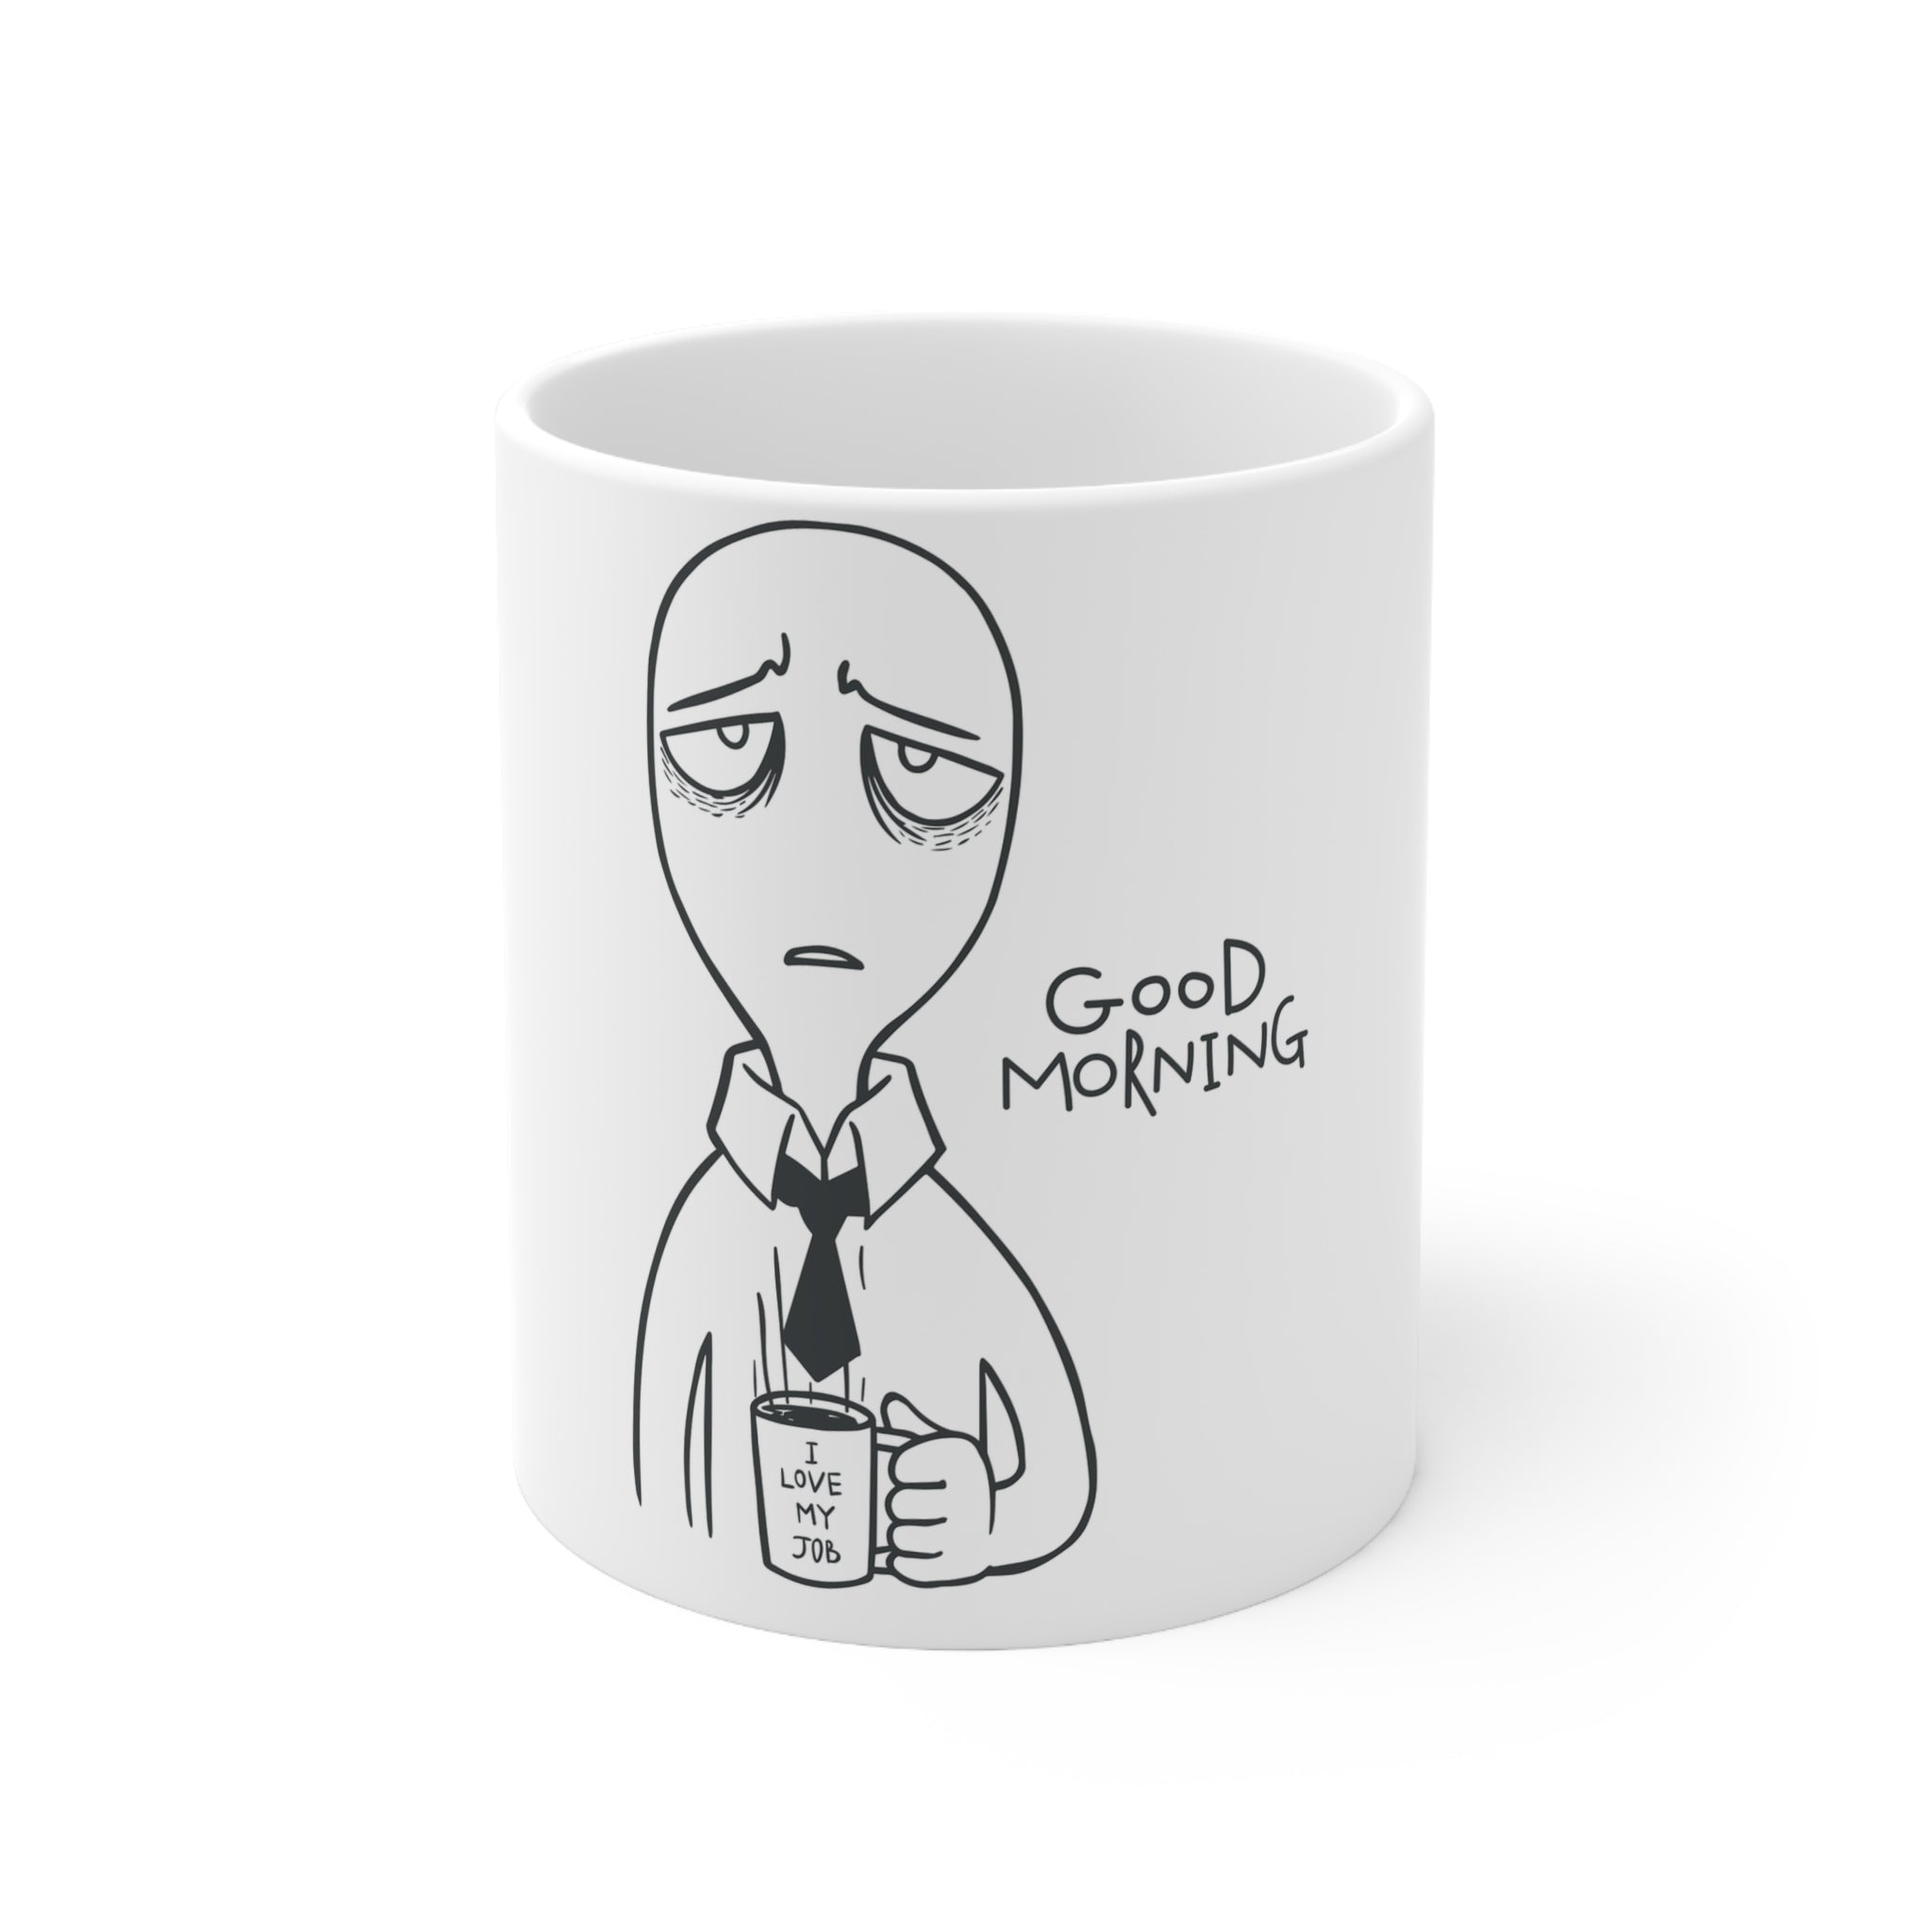 Start Your Day with a Chuckle: 'Good Morning...Love My Job...' Sarcastic Pencil Drawn Ceramic Mug 11oz - A Humorous Twist to Your Morning Routine